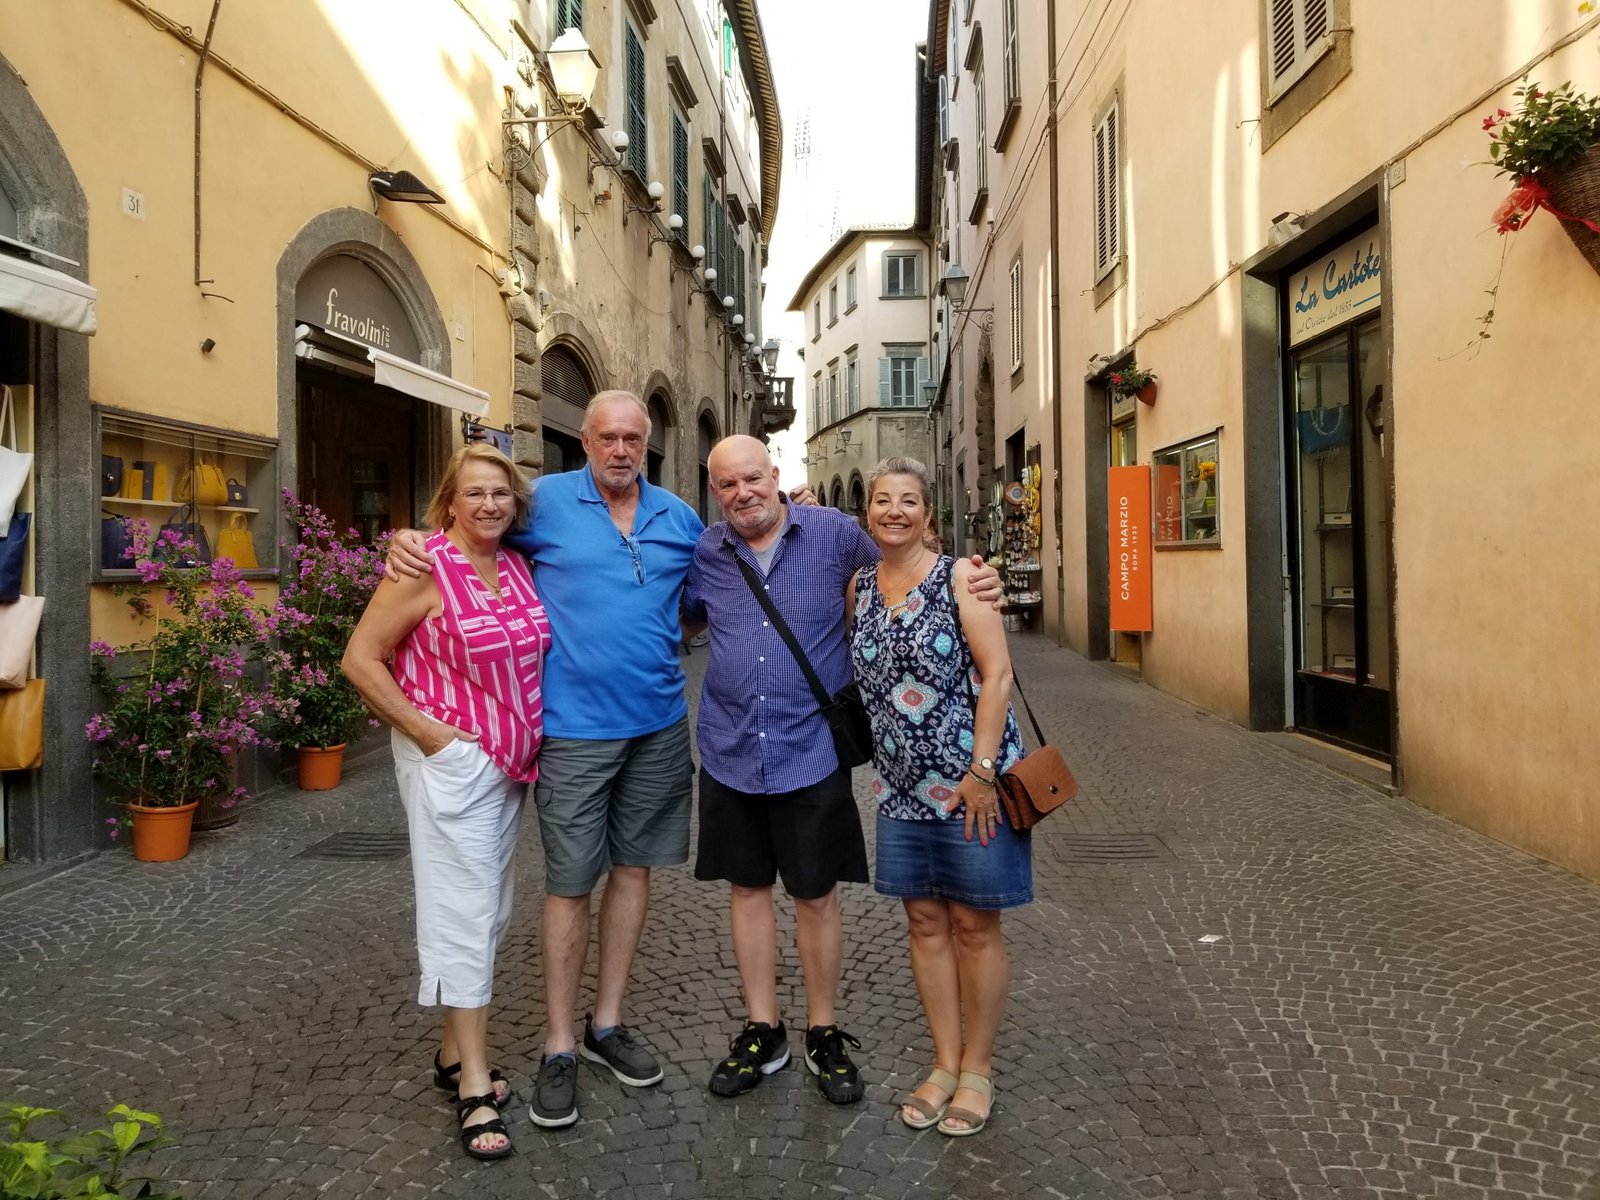 A reunion of friends made in Italy, https://ouritalianjourney.com/reunion-from-a-social media-encounter-in-italy